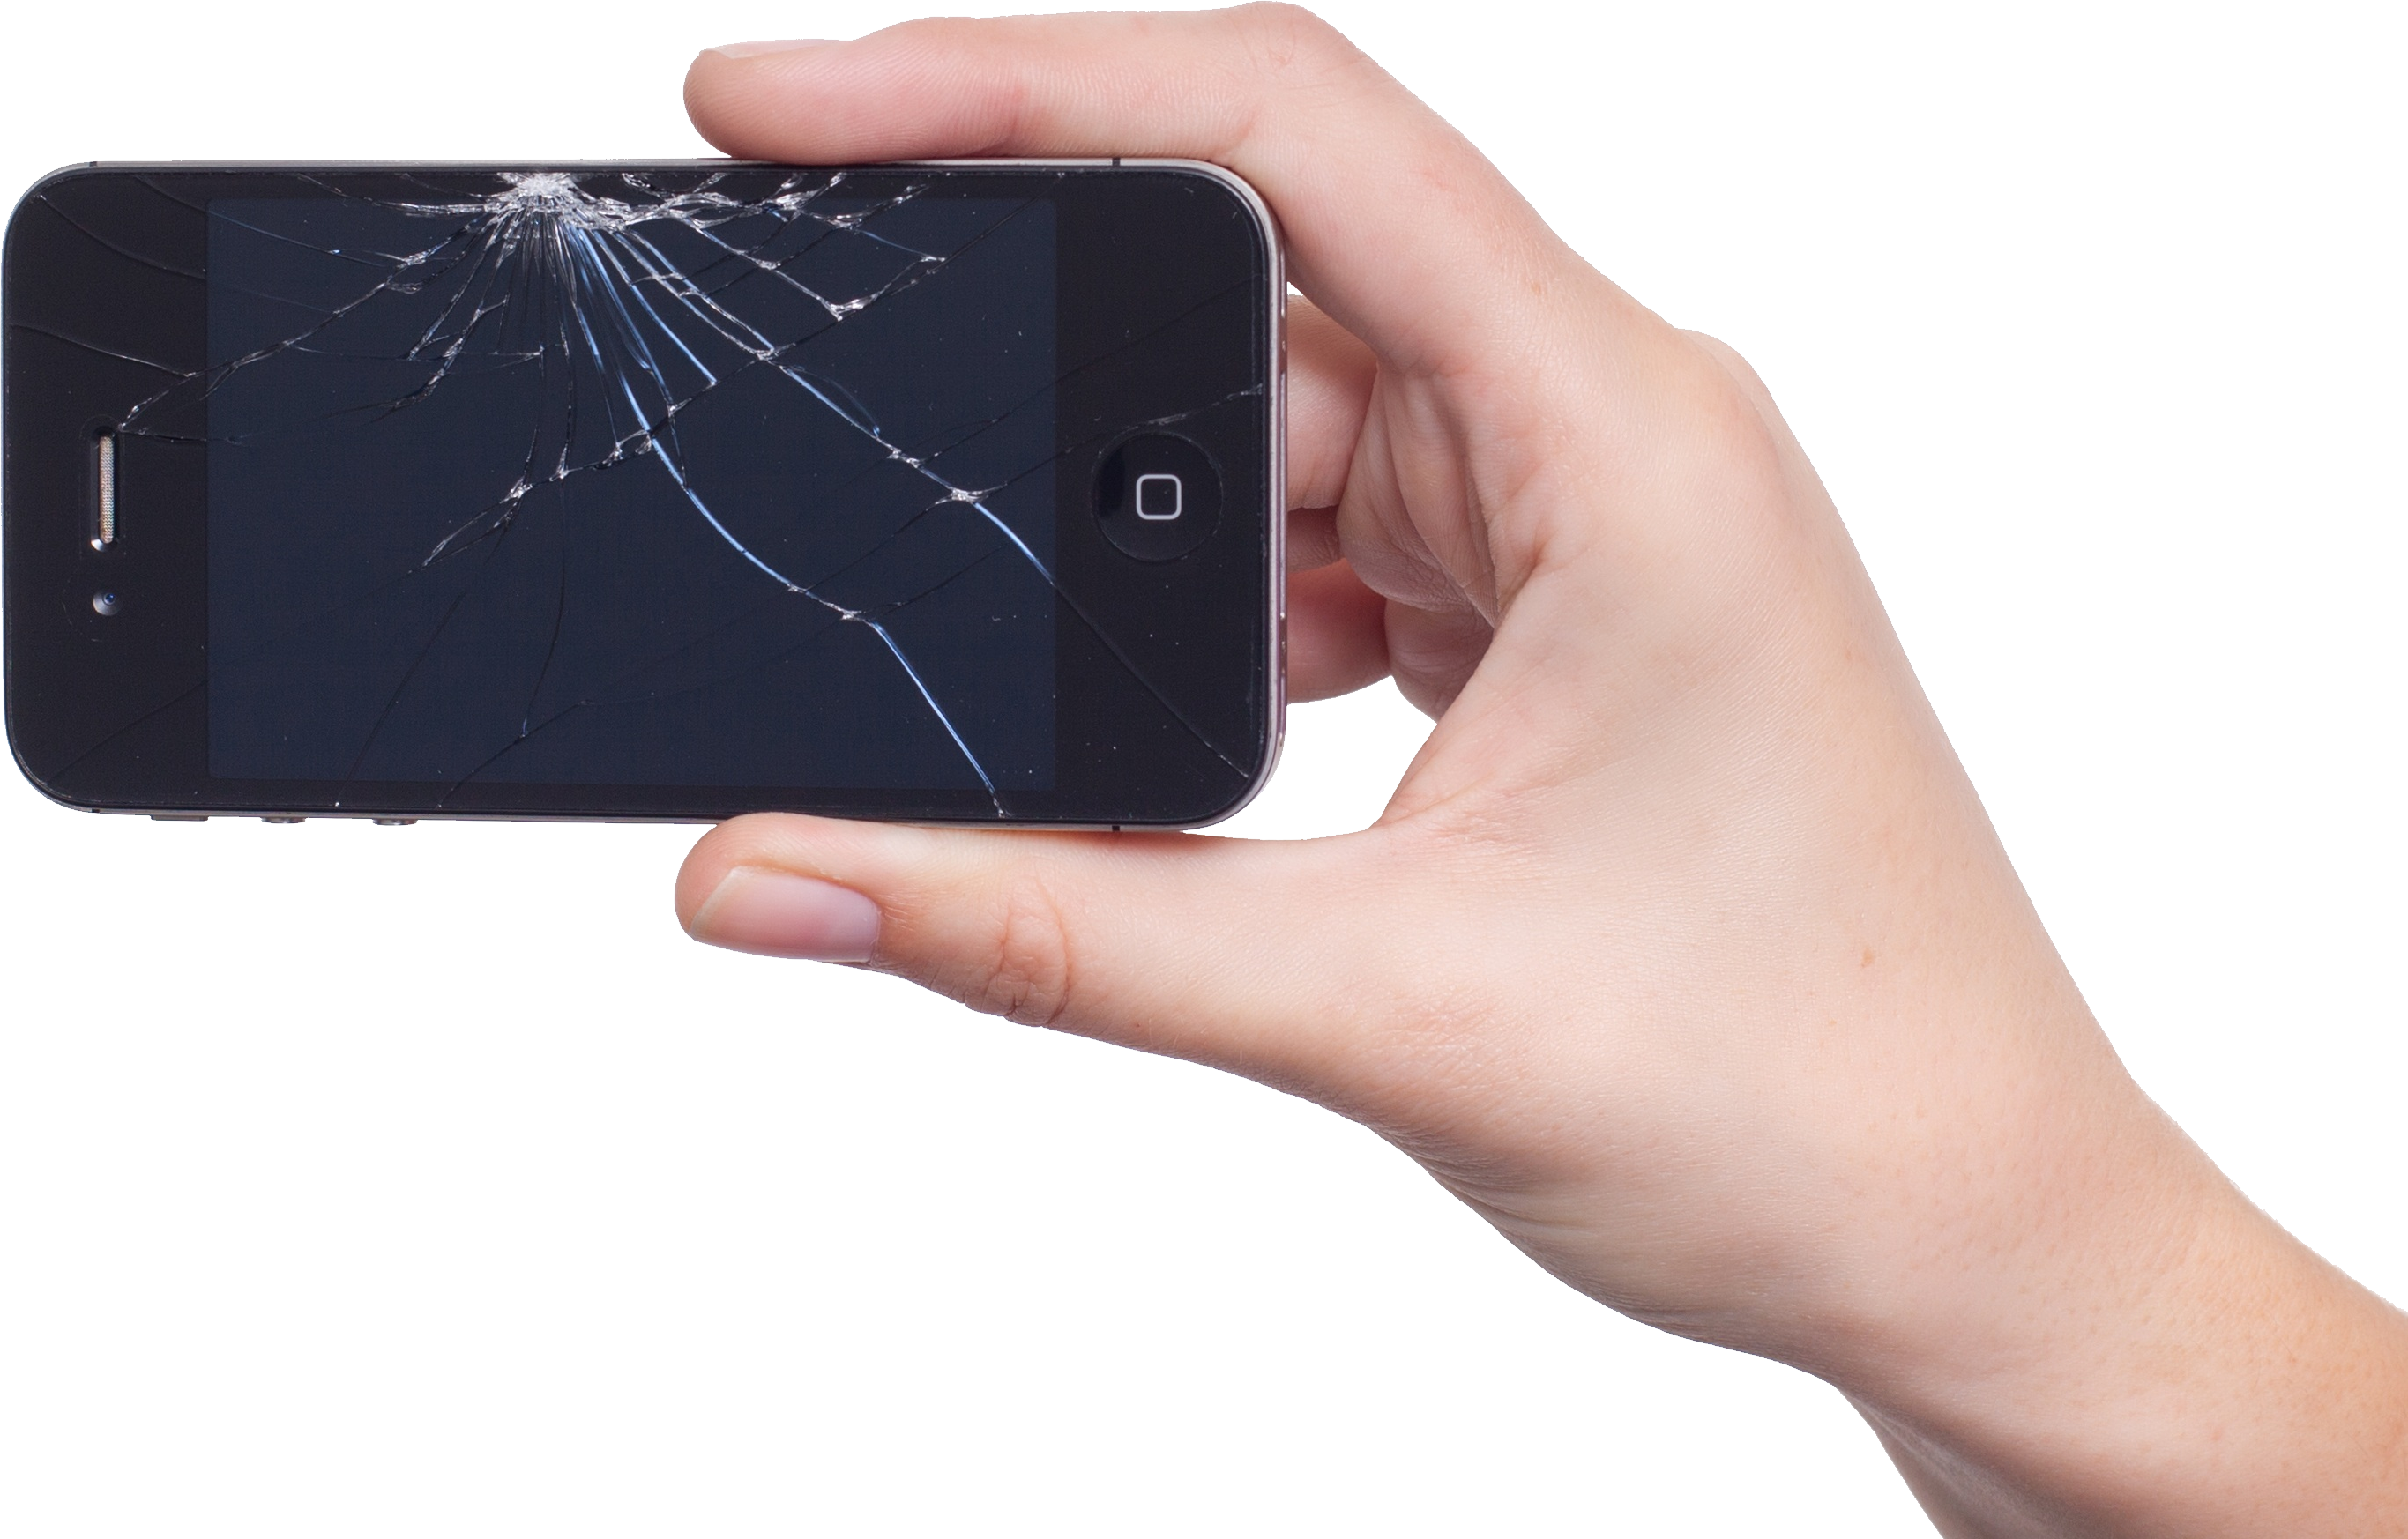 A Hand Holding A Cell Phone With A Cracked Screen